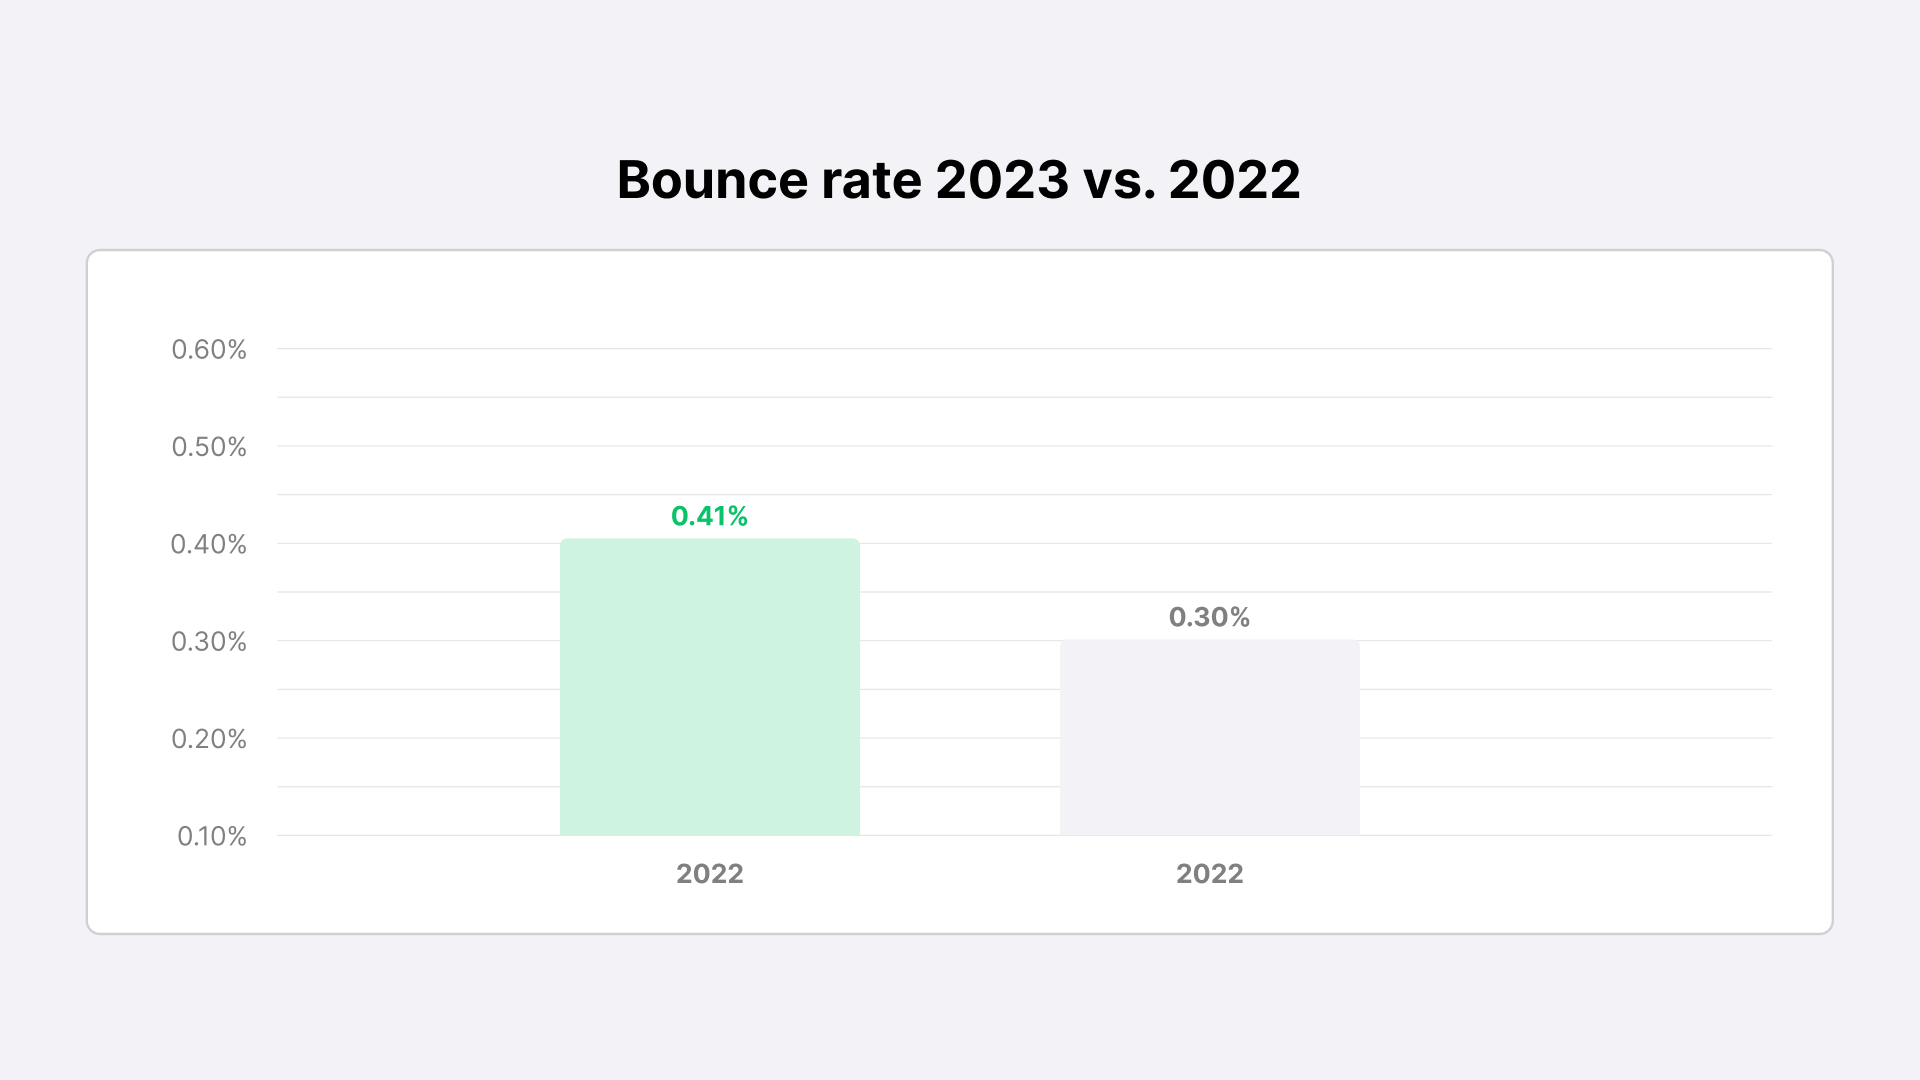 Bounce rate benchmarks 2022 vs 2023